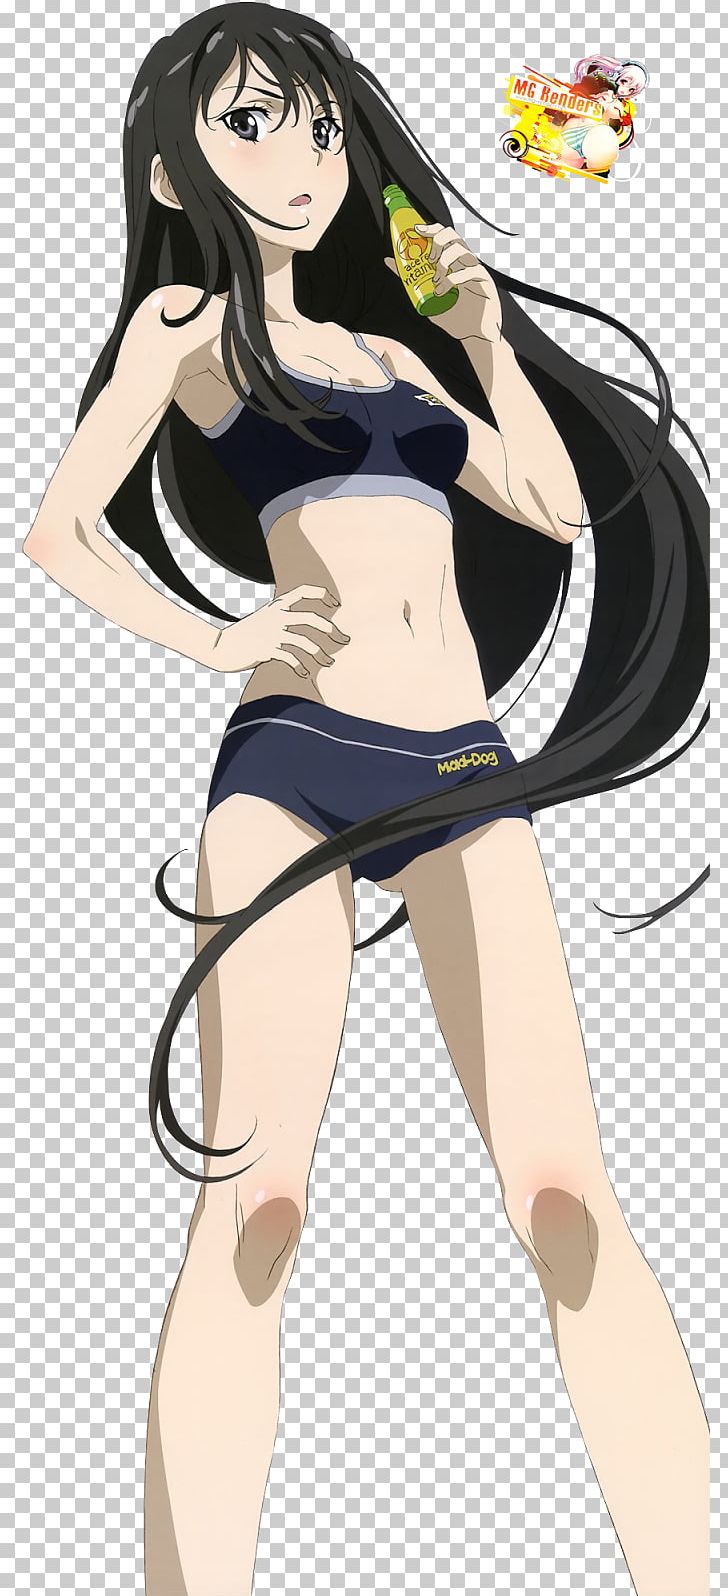 A Certain Magical Index Anime Mangaka Bra Hime Cut PNG, Clipart, Anime, Anime Render, Arm, Black Hair, Bra Free PNG Download